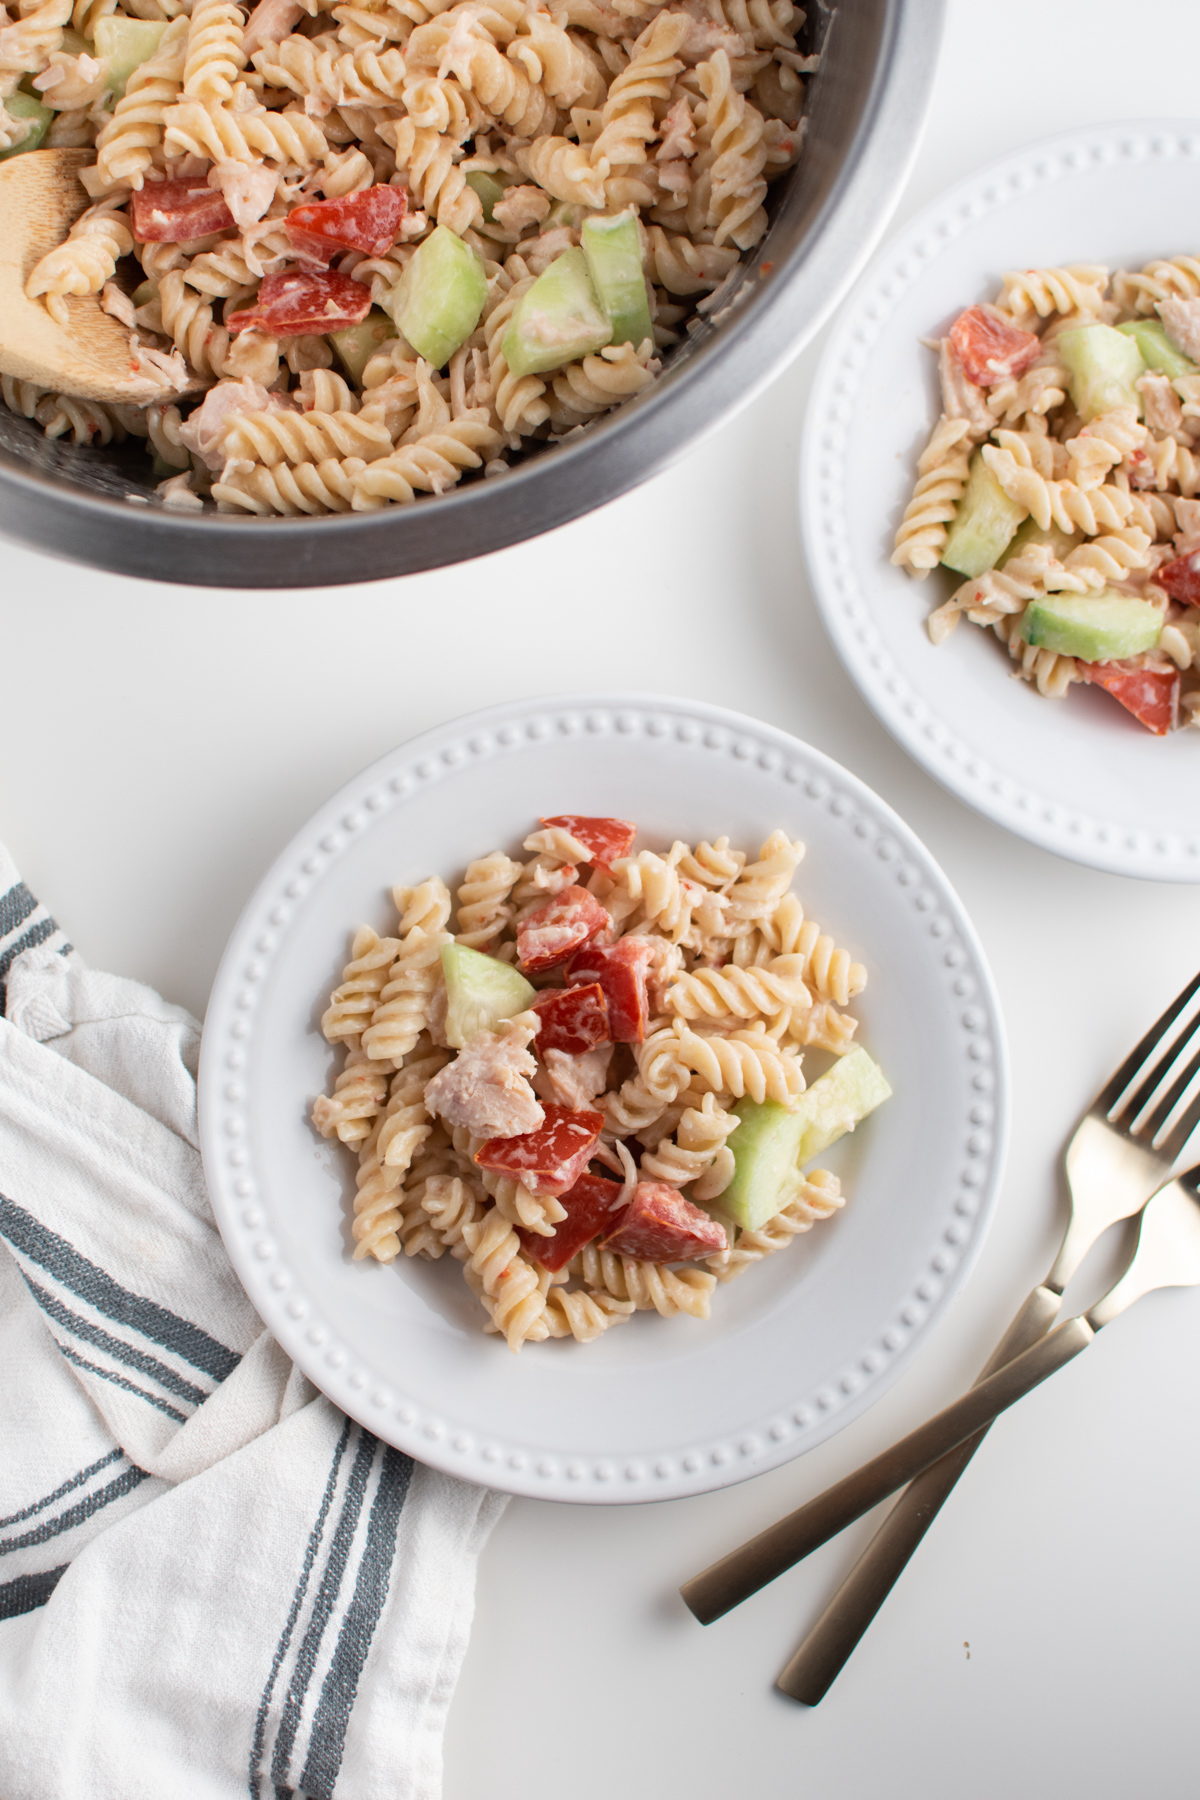 Pasta salad with rotini on white plates next to salad bowl and utensils.